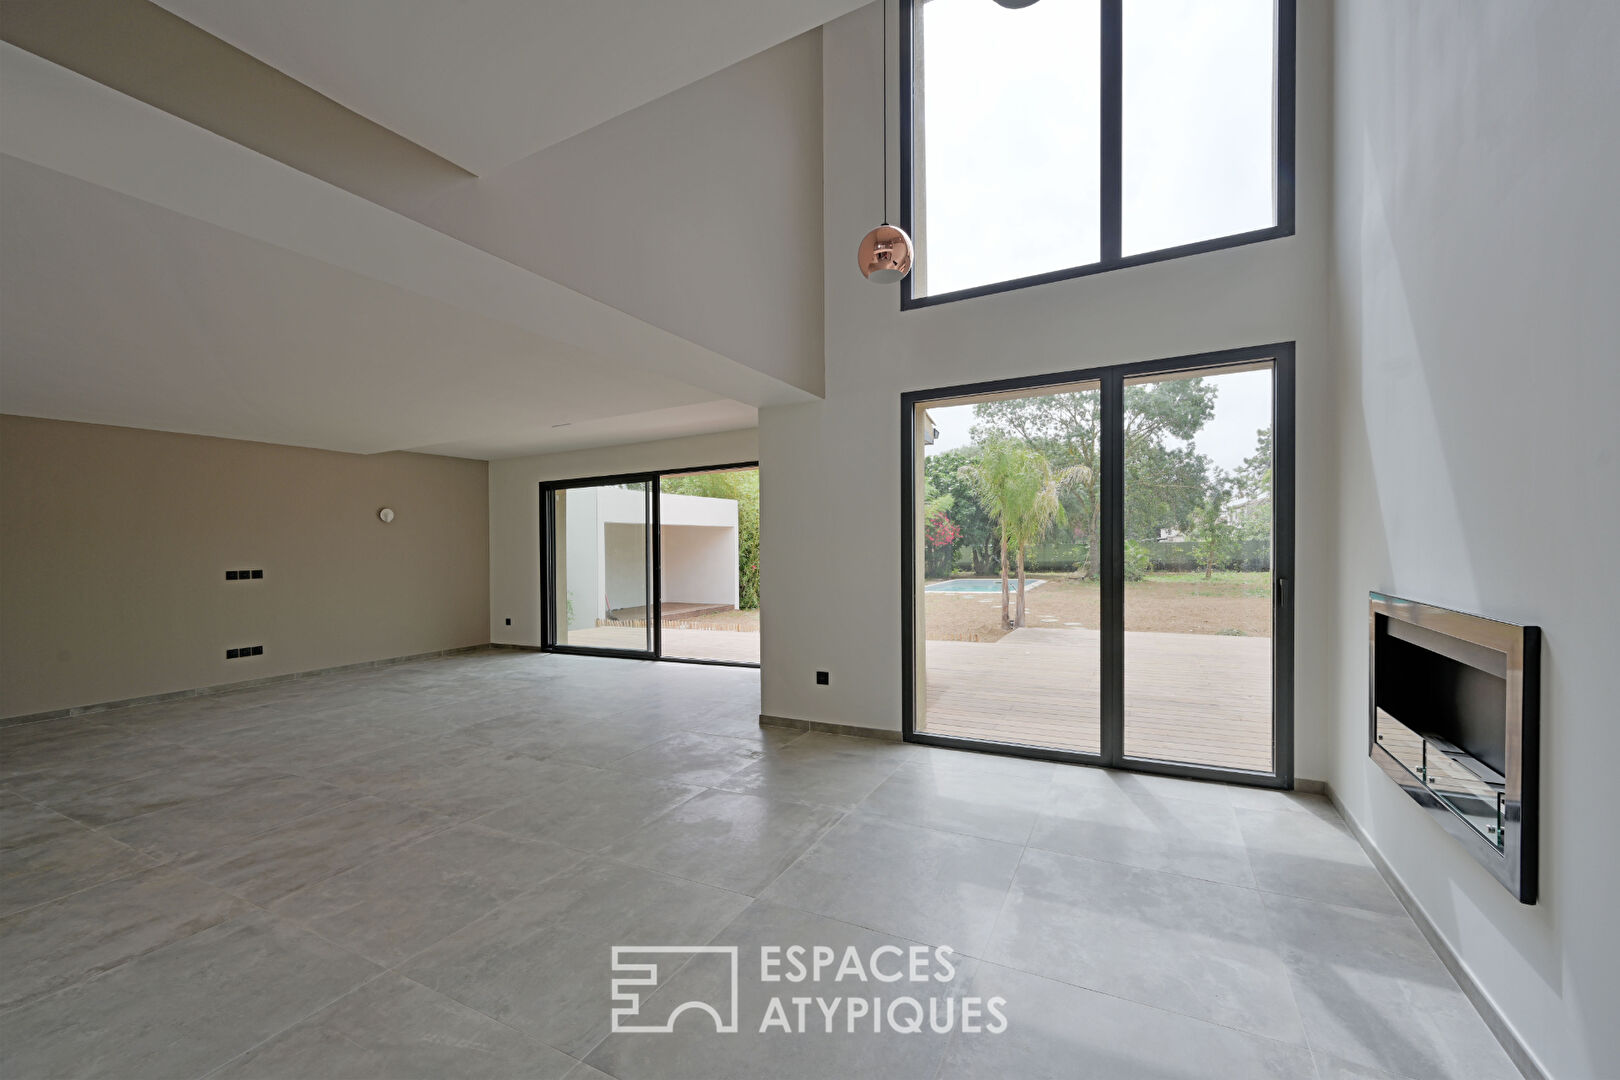 Superb renovated villa with large garden, swimming pool and pool house